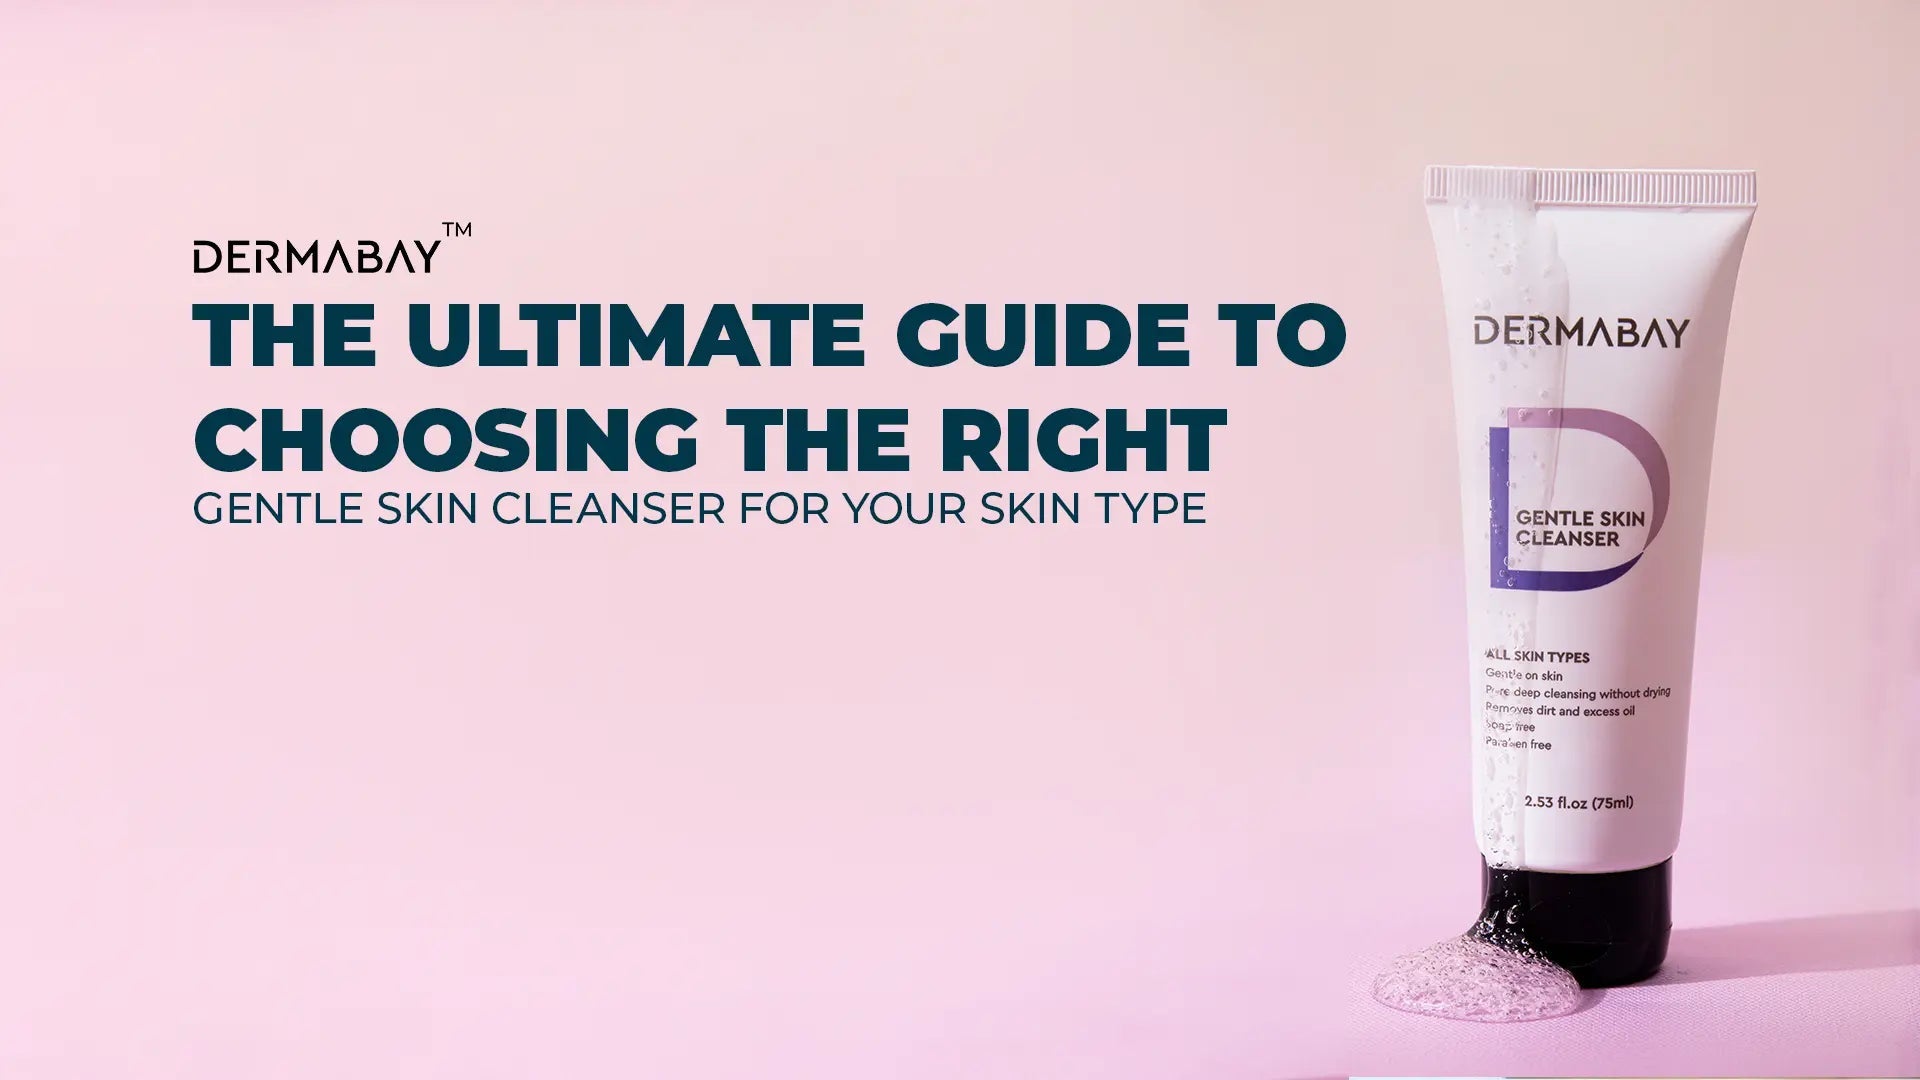 The Ultimate Guide to Choosing the Right Gentle Skin Cleanser for Your Skin Type - Dermabay